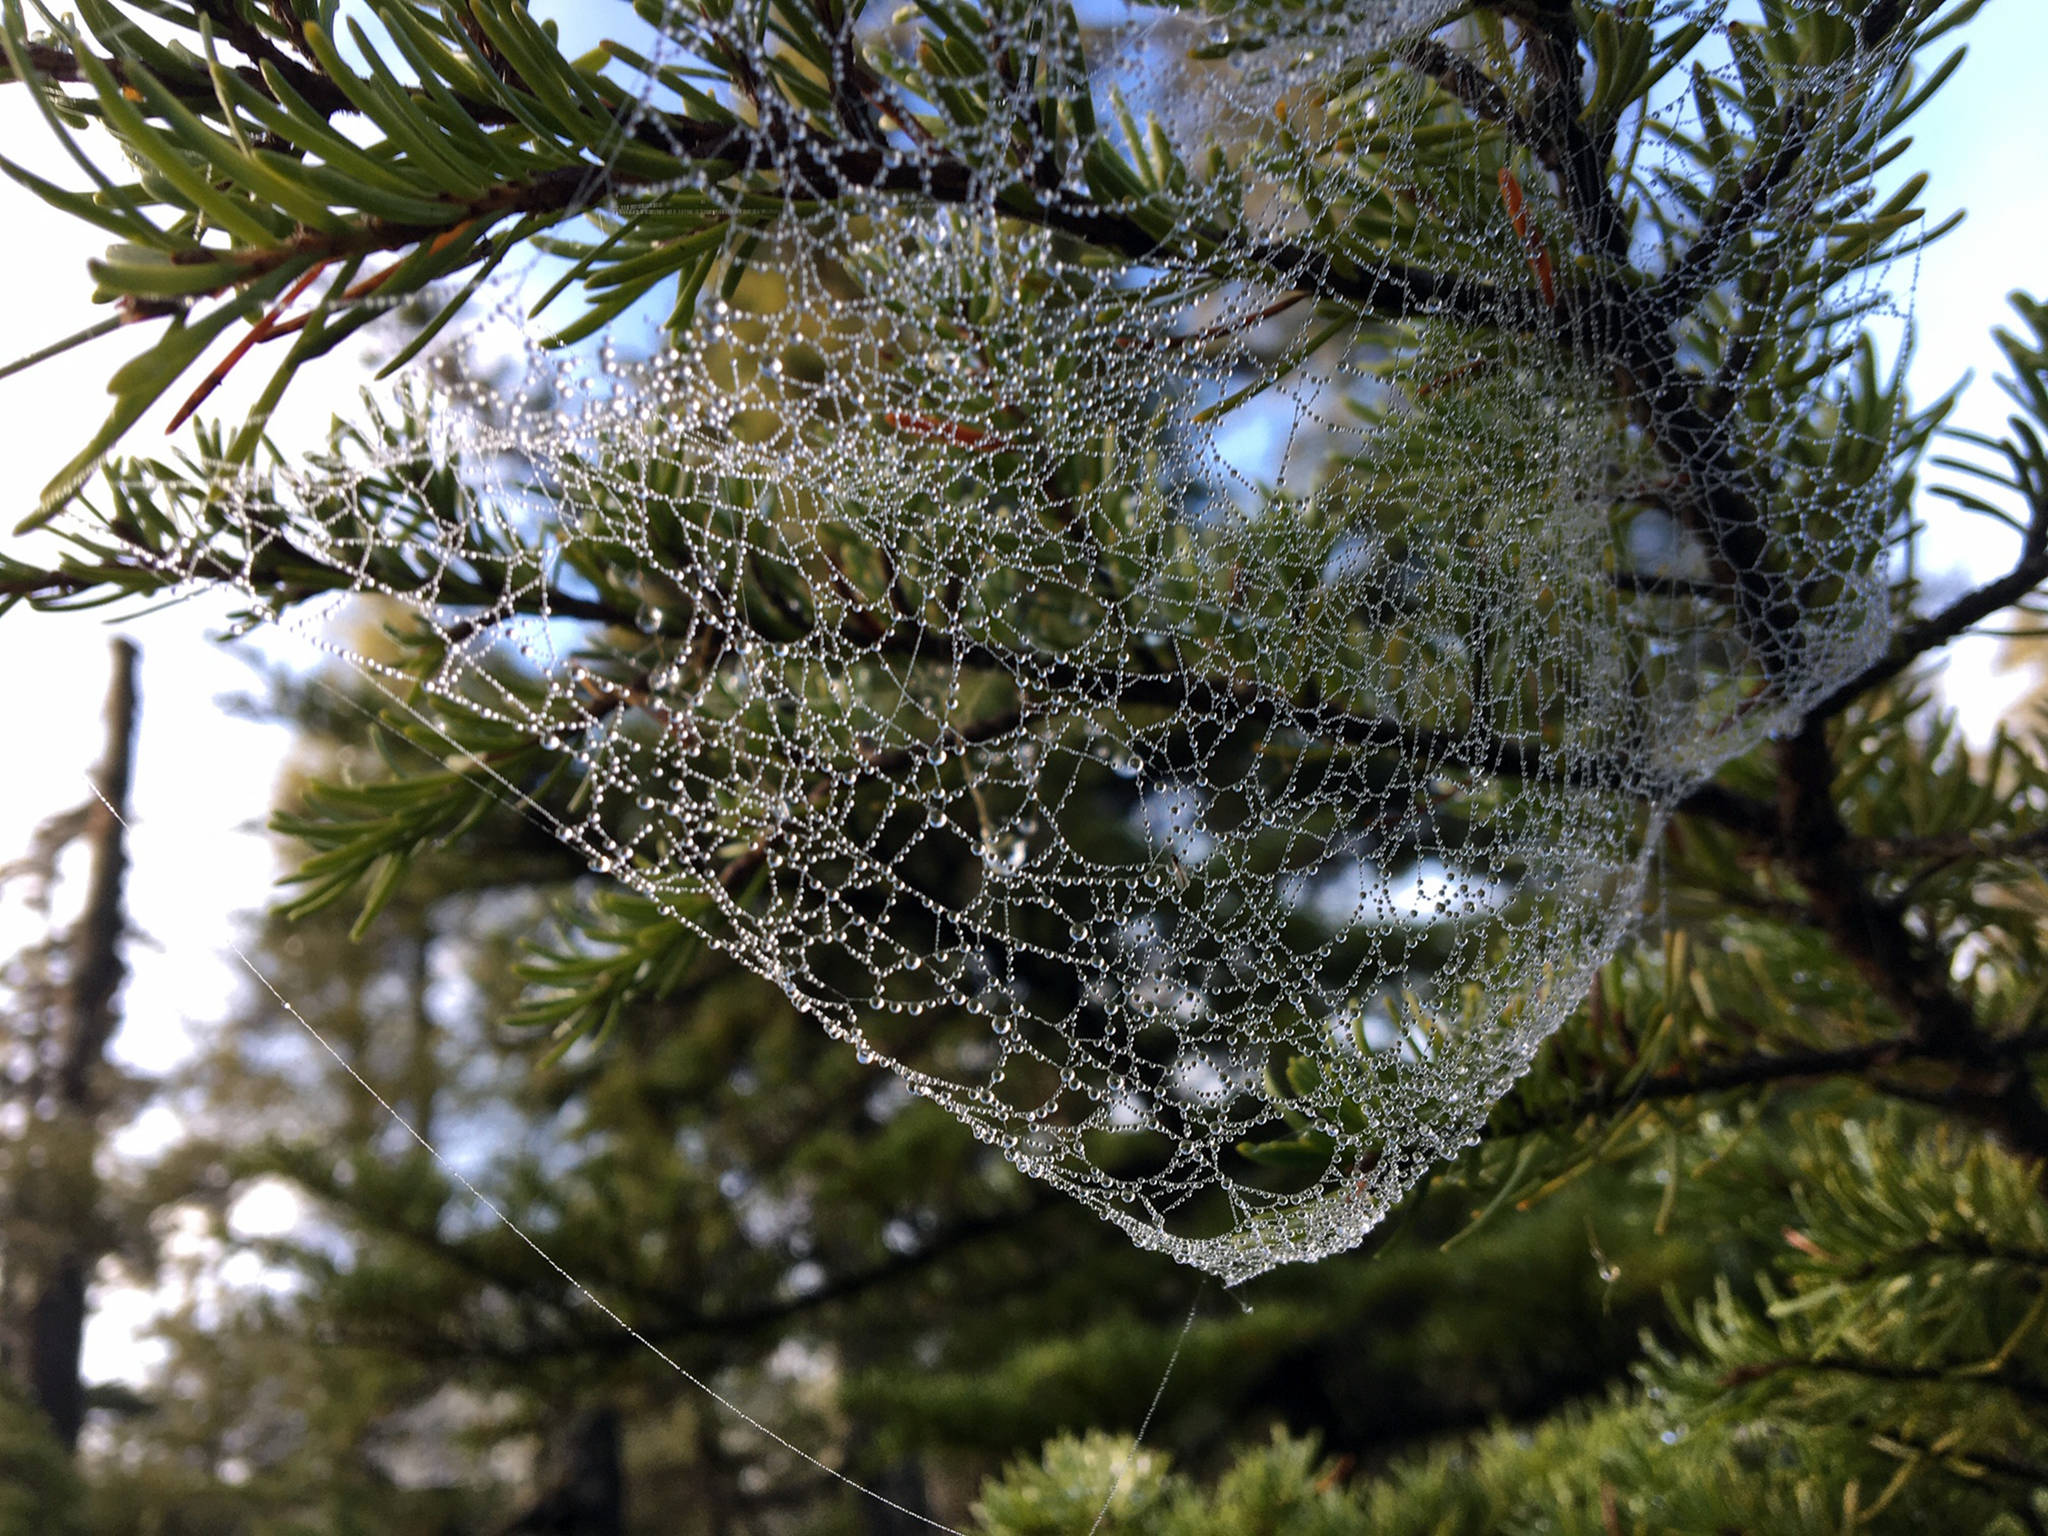 Courtesy photos | Denise Carroll                                The gossamer look of a dewy spider’s web, Jan. 8, at Eaglecrest.